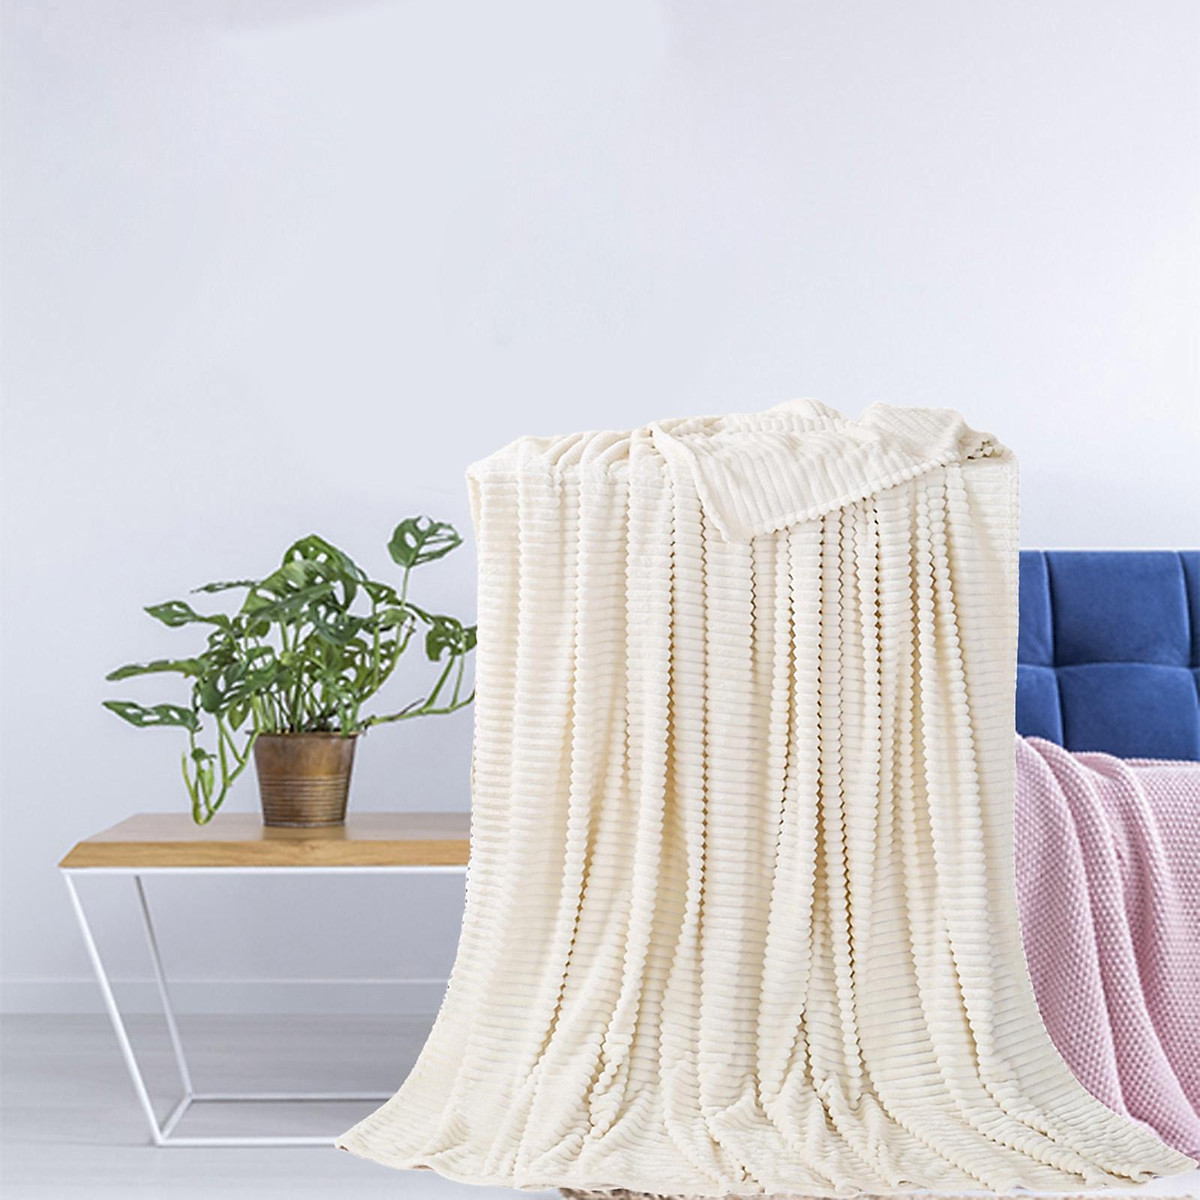 Best Throw Blanket Decorating Ideas - How to Decorate with Throws